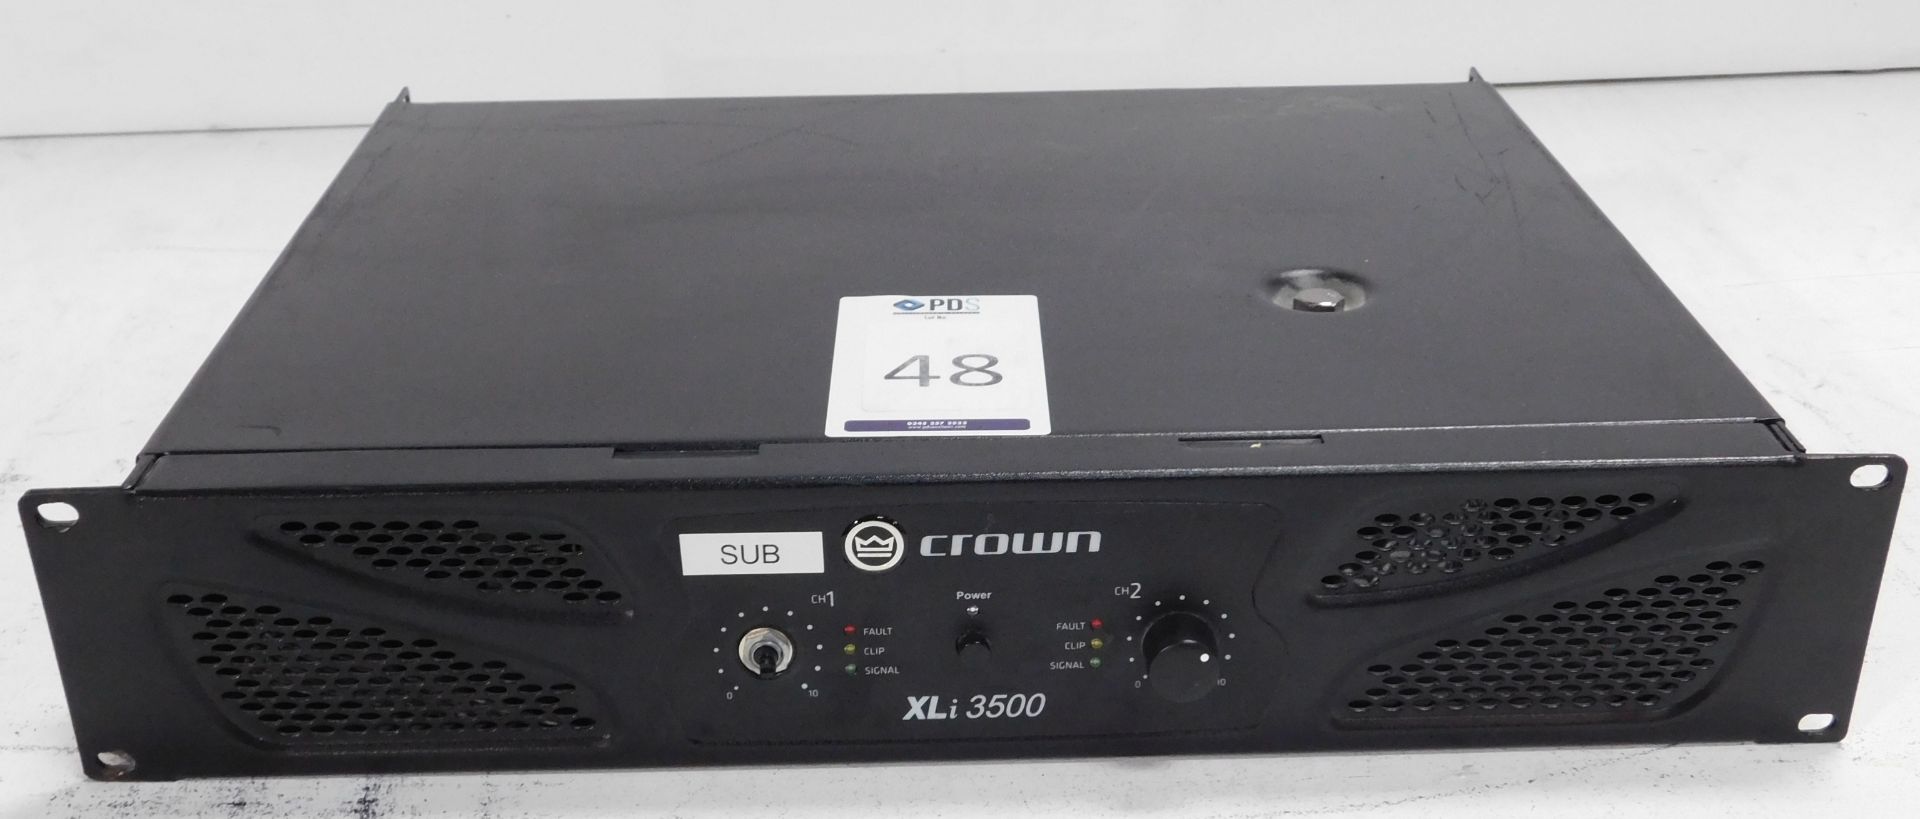 Crown Xli3500 Rack-Mount Power Amplifier (Location Brentwood. Please Refer to General Notes)